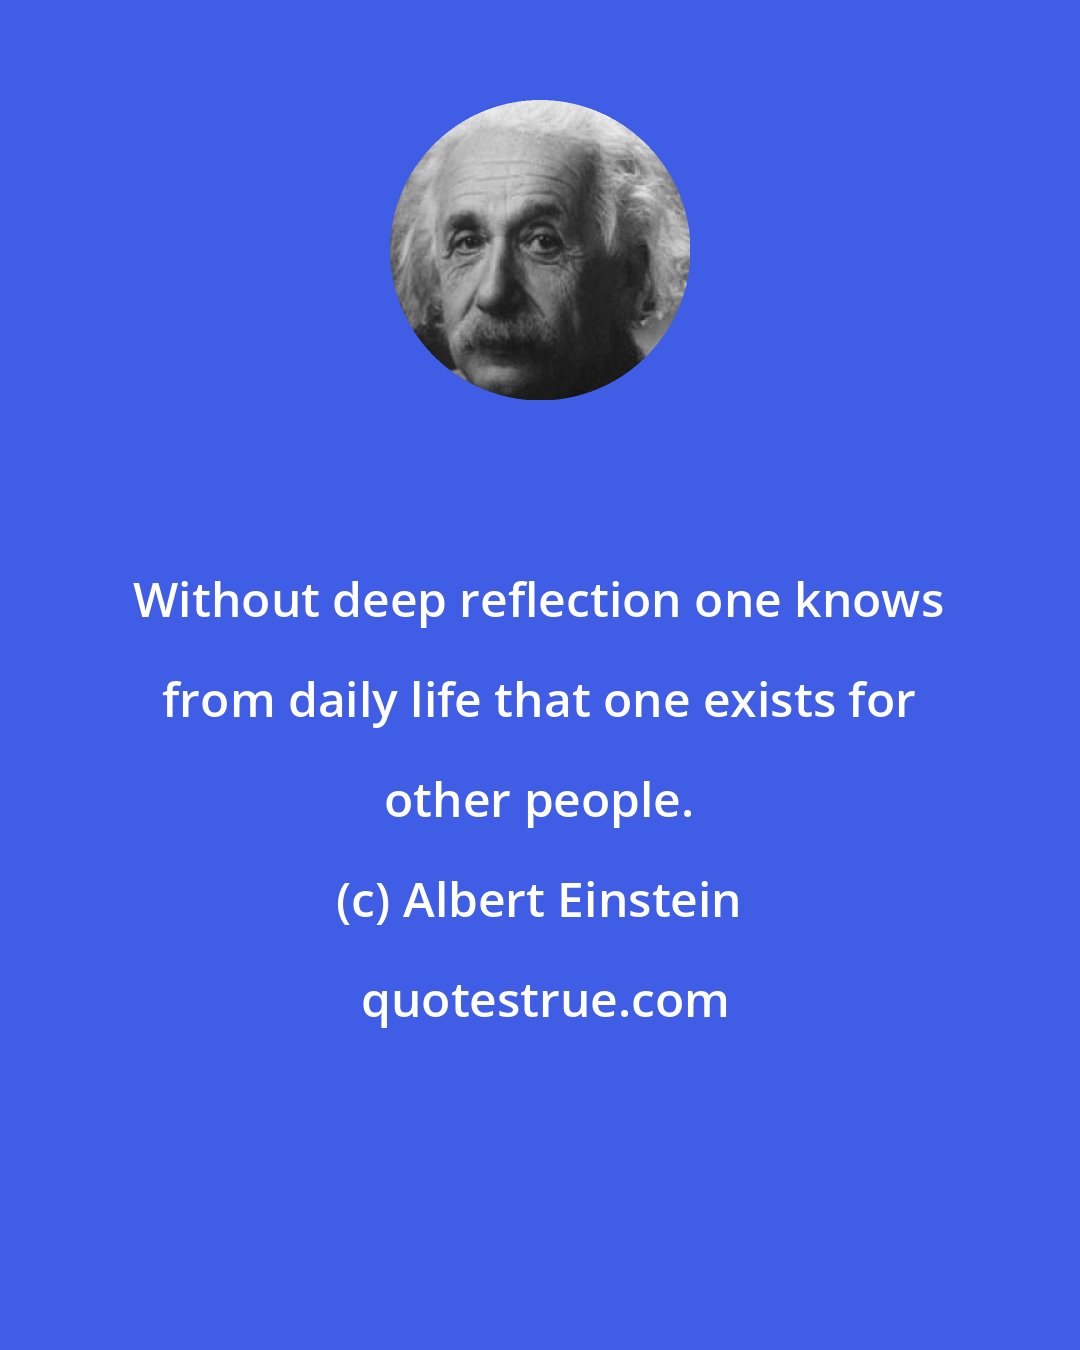 Albert Einstein: Without deep reflection one knows from daily life that one exists for other people.